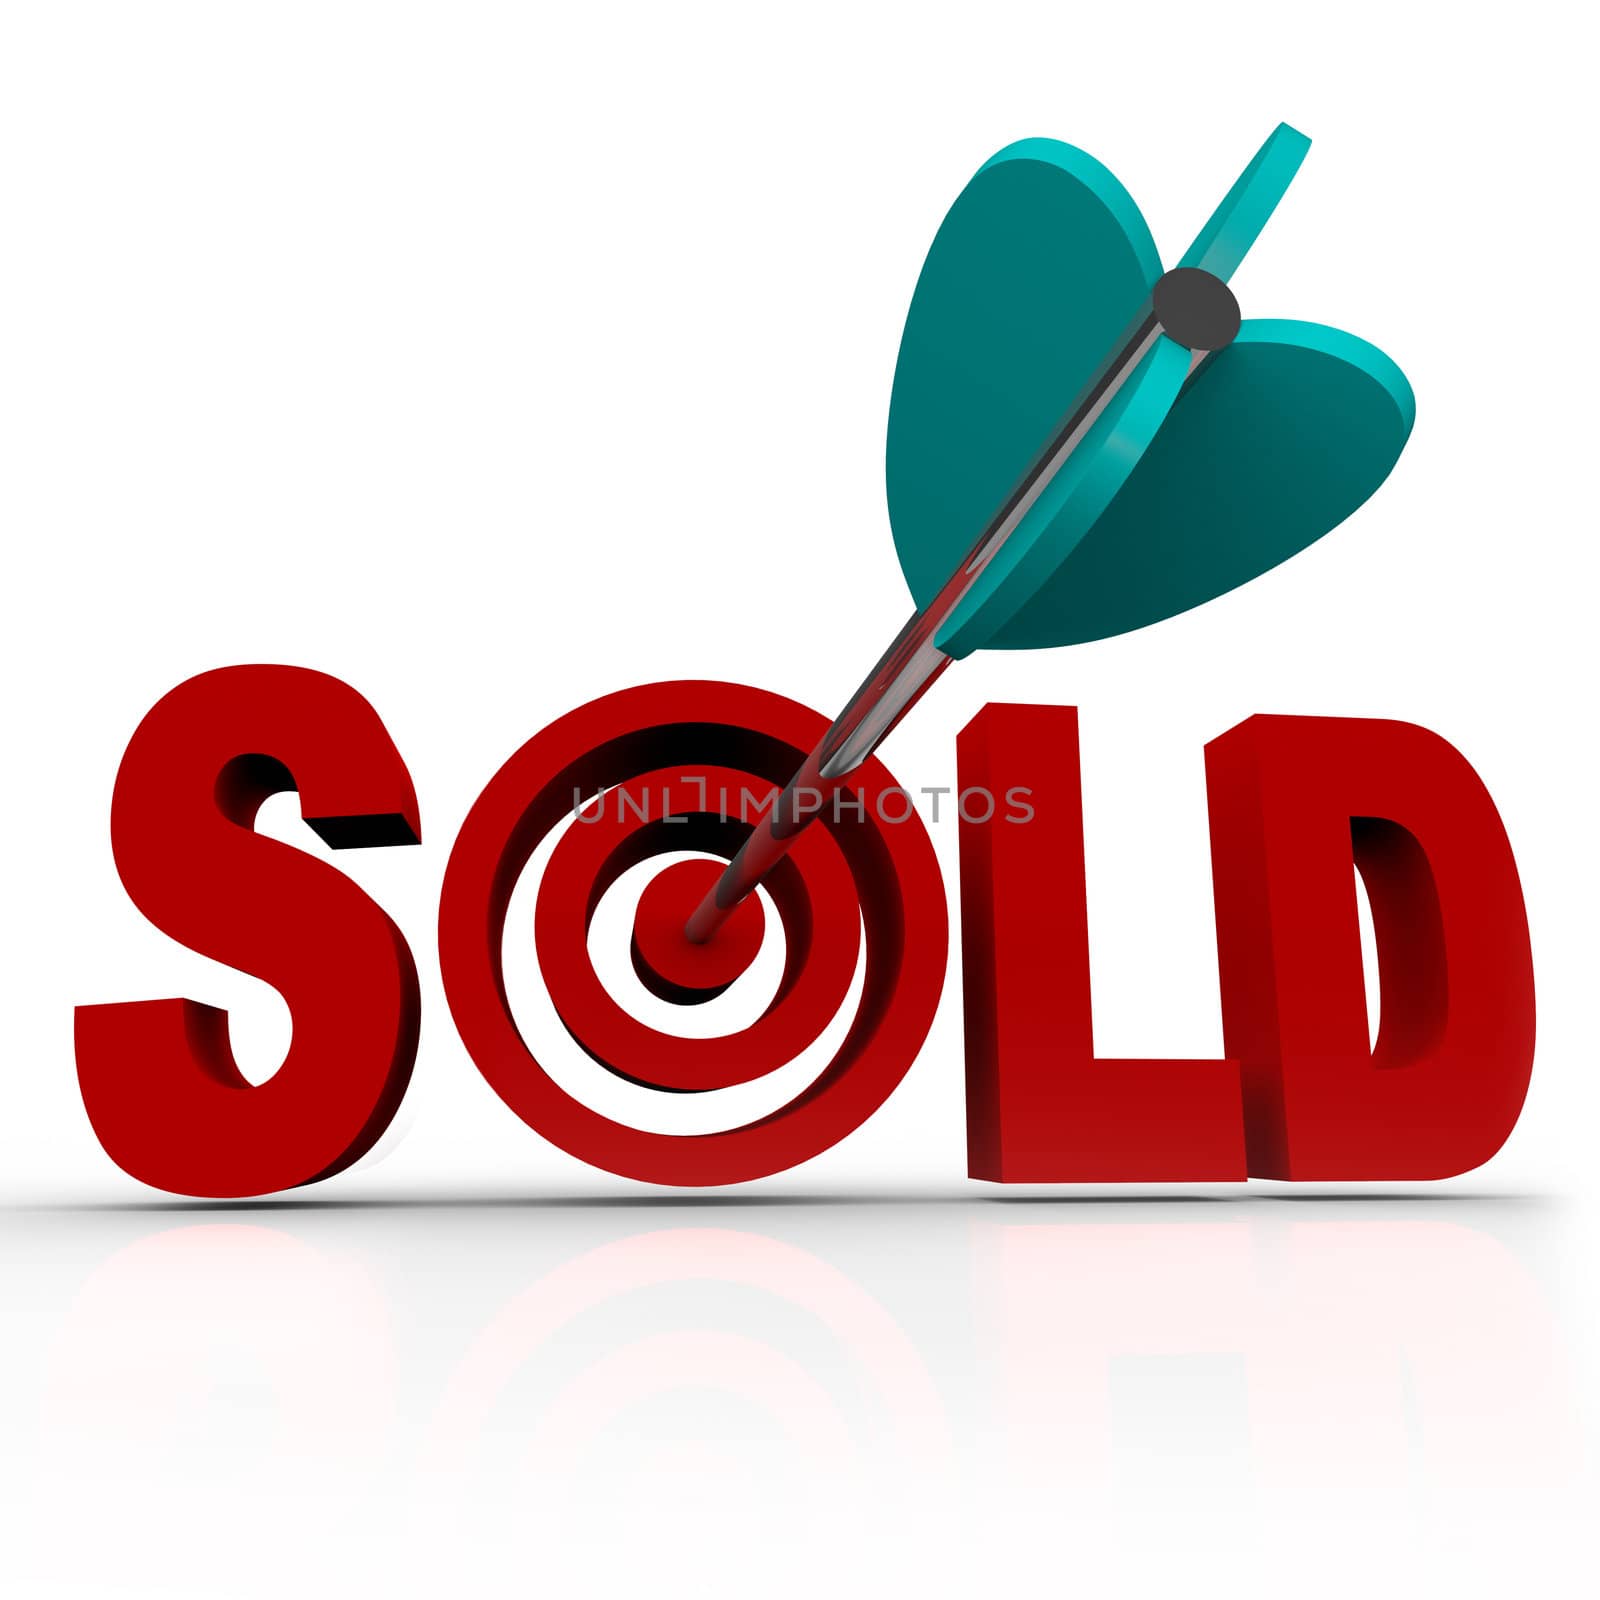 Sold - Arrow in Word Bullseye - Done Deal Transaction by iQoncept